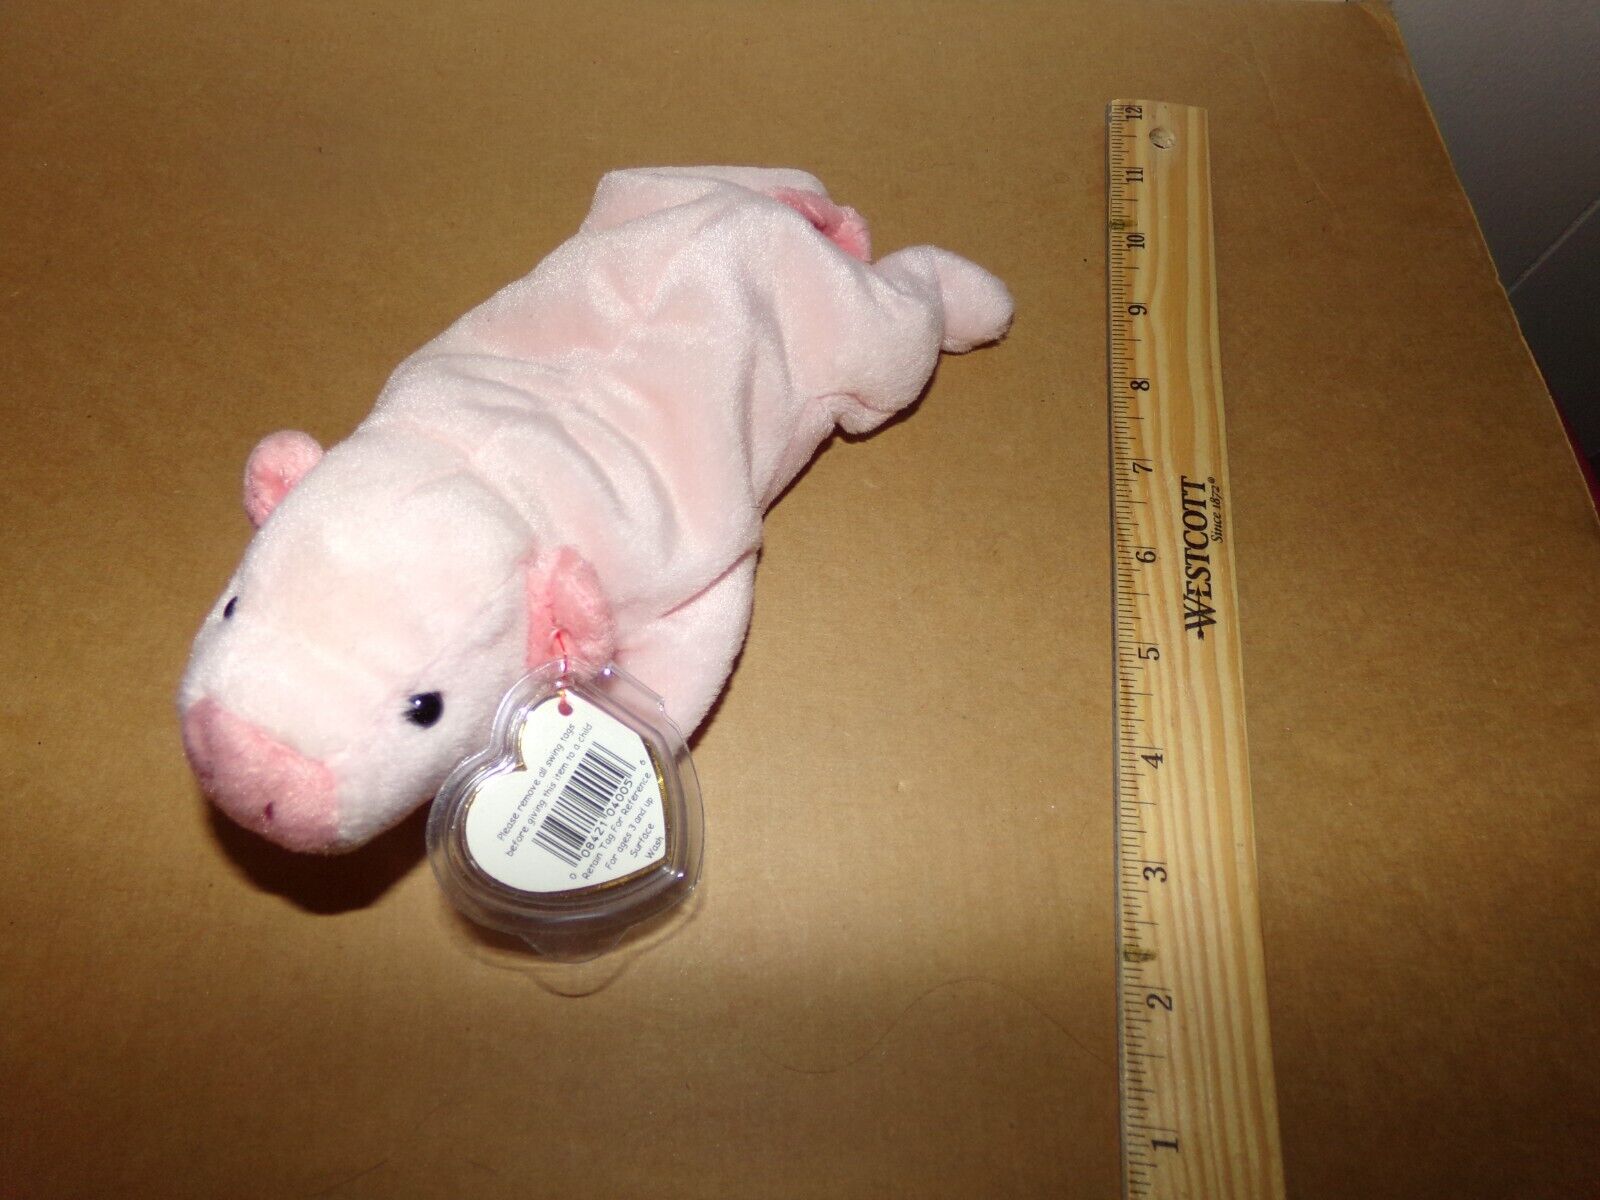 Ty Original Beanie Baby Squealer Pink Pig 1993 Retired w/tag 